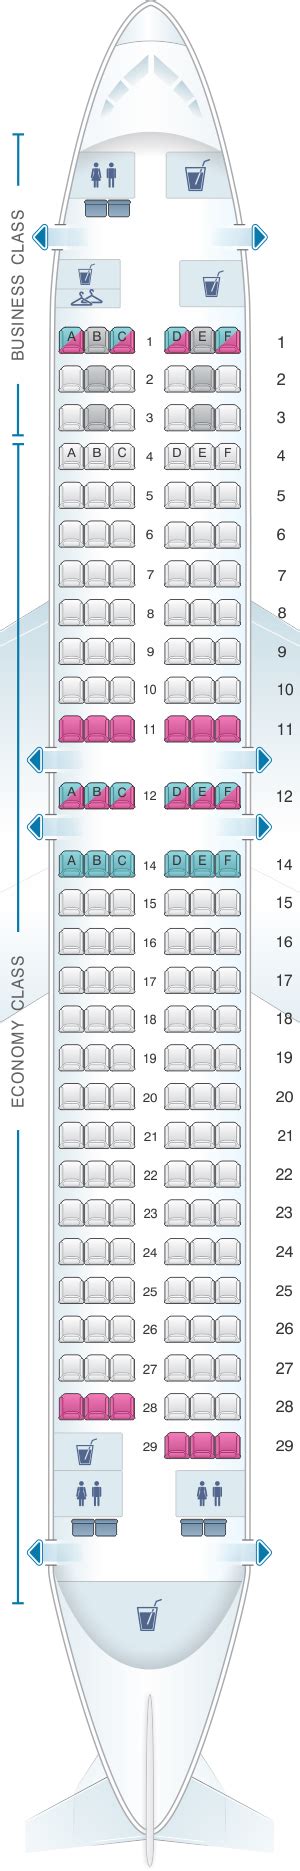 Turkish Airlines Boeing 777 300er Economy Class Seat Map Várias Classes